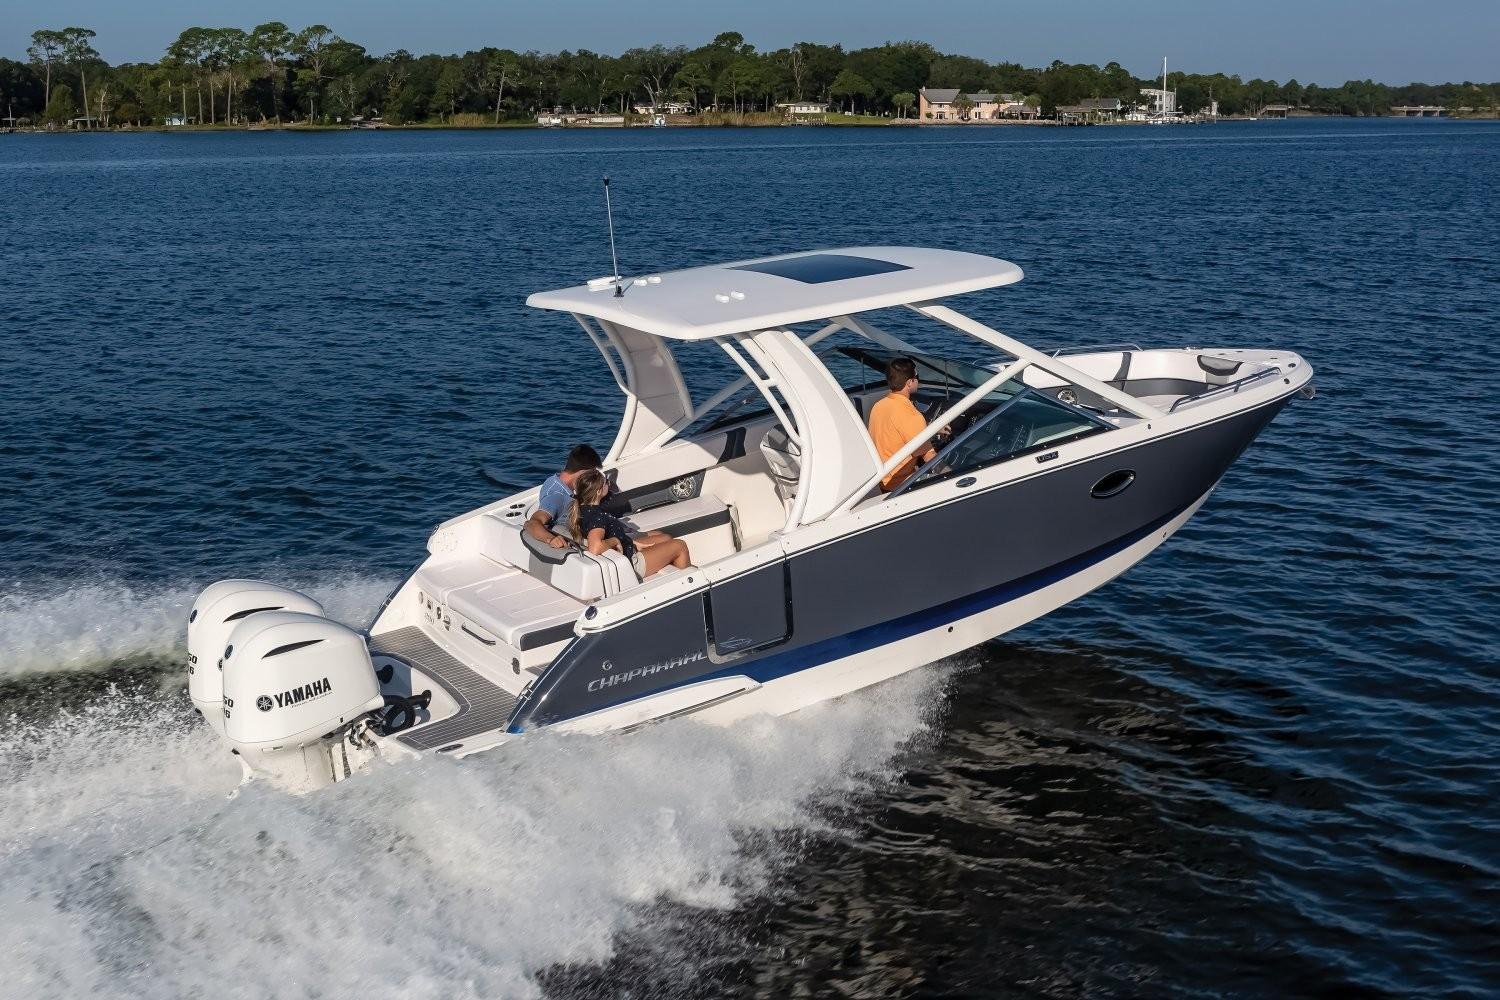 New 2024 Chaparral 280 OSX, 98028 Kenmore Boat Trader